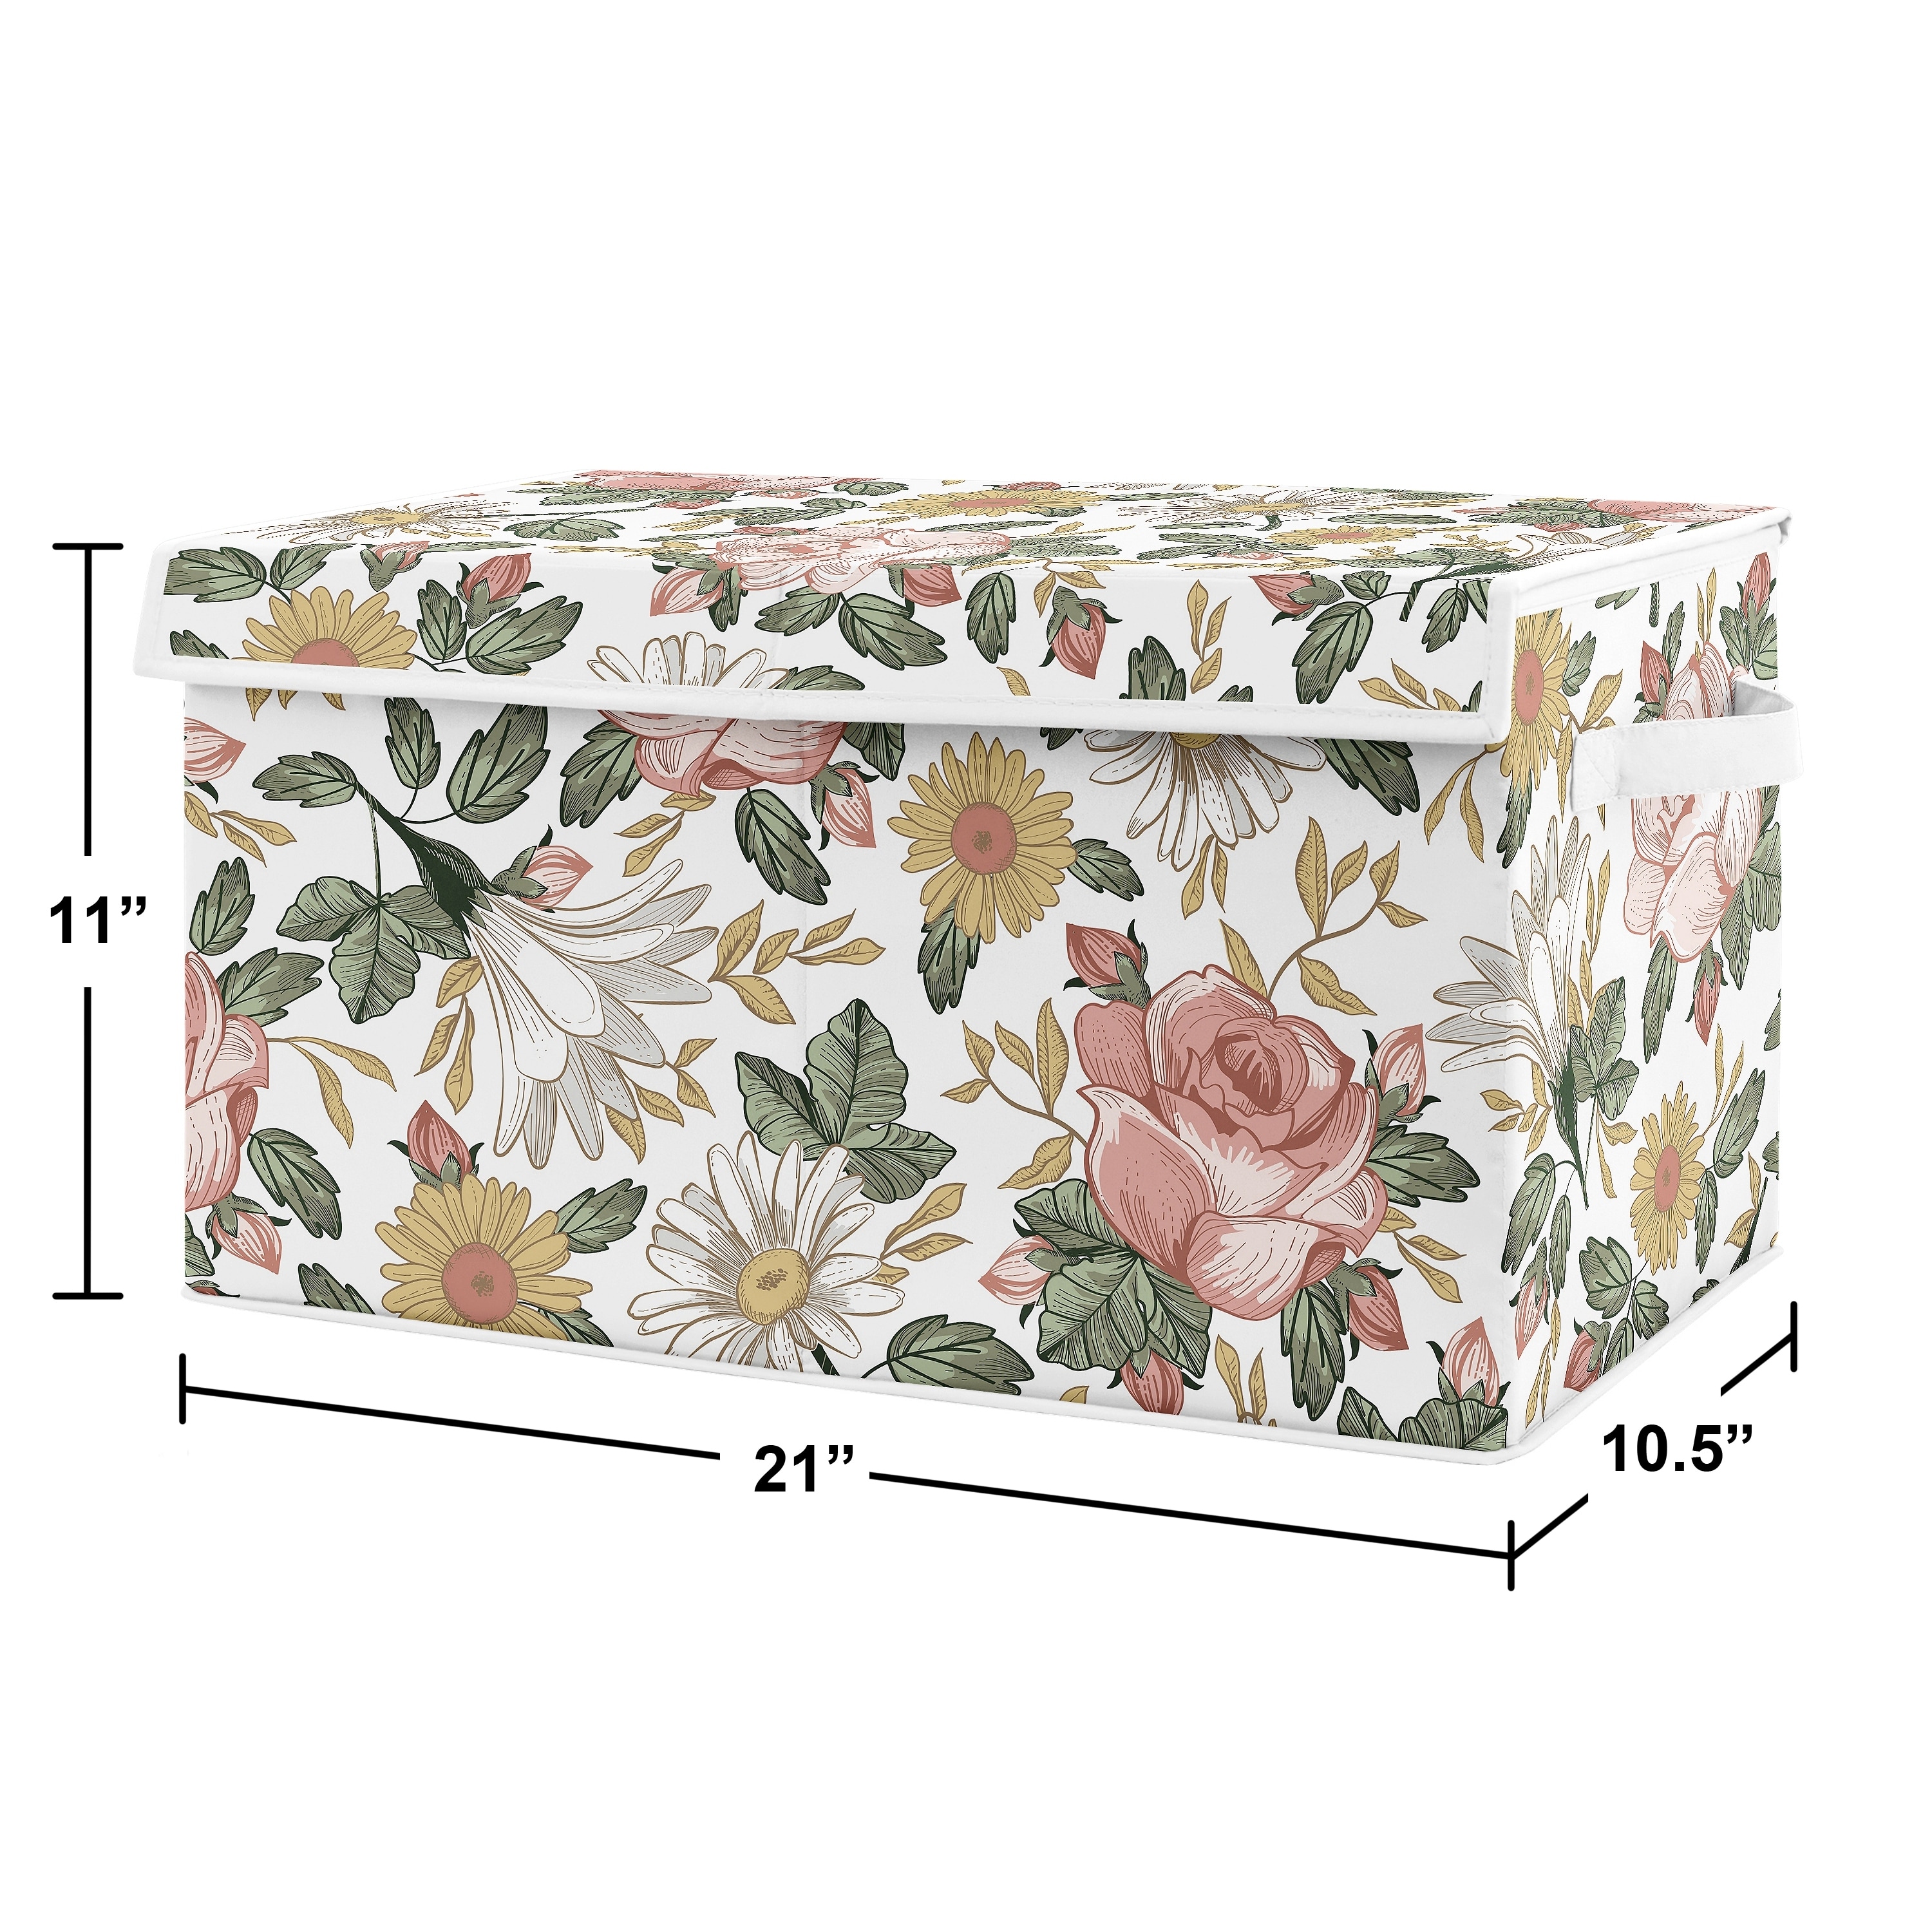 https://ak1.ostkcdn.com/images/products/is/images/direct/ed4775ef2746c1e57f233db55fc2d6b001cbe596/Vintage-Floral-Boho-Collection-Girl-Kids-Fabric-Toy-Bin-Storage---Blush-Pink%2C-Yellow-and-Green-Shabby-Chic-Rose-Flower-Farmhouse.jpg